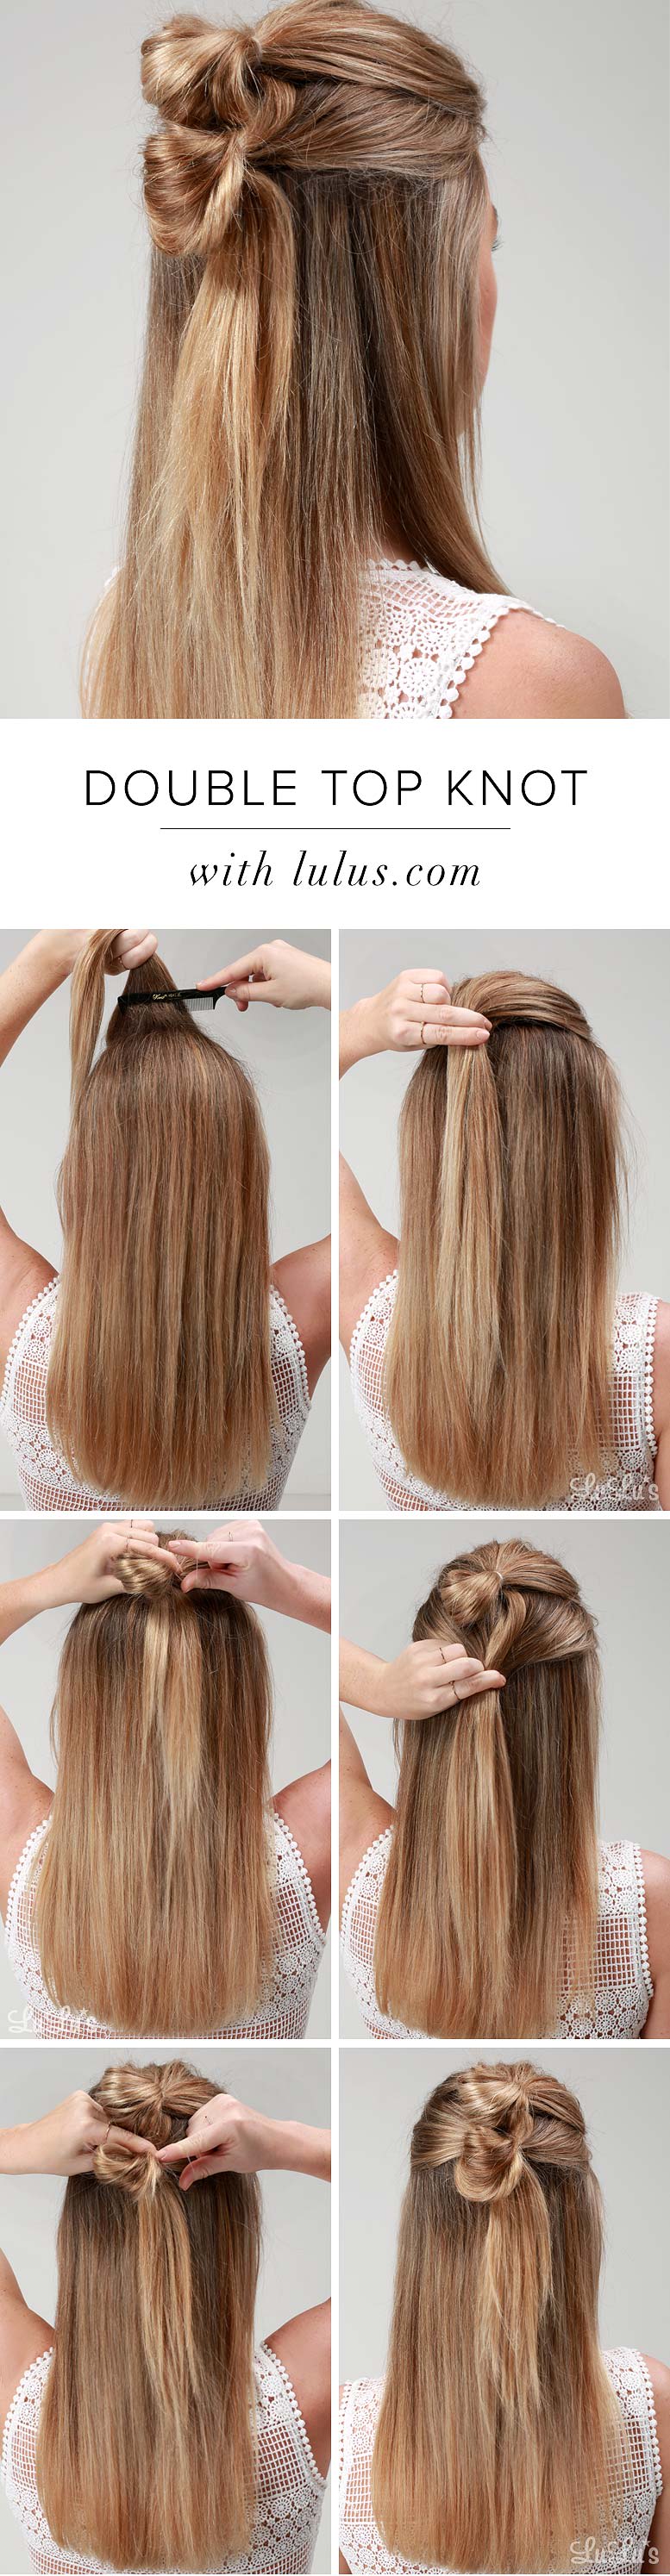 Lulus How-To: Double Top Knot Hair Tutorial  Fashion Blog